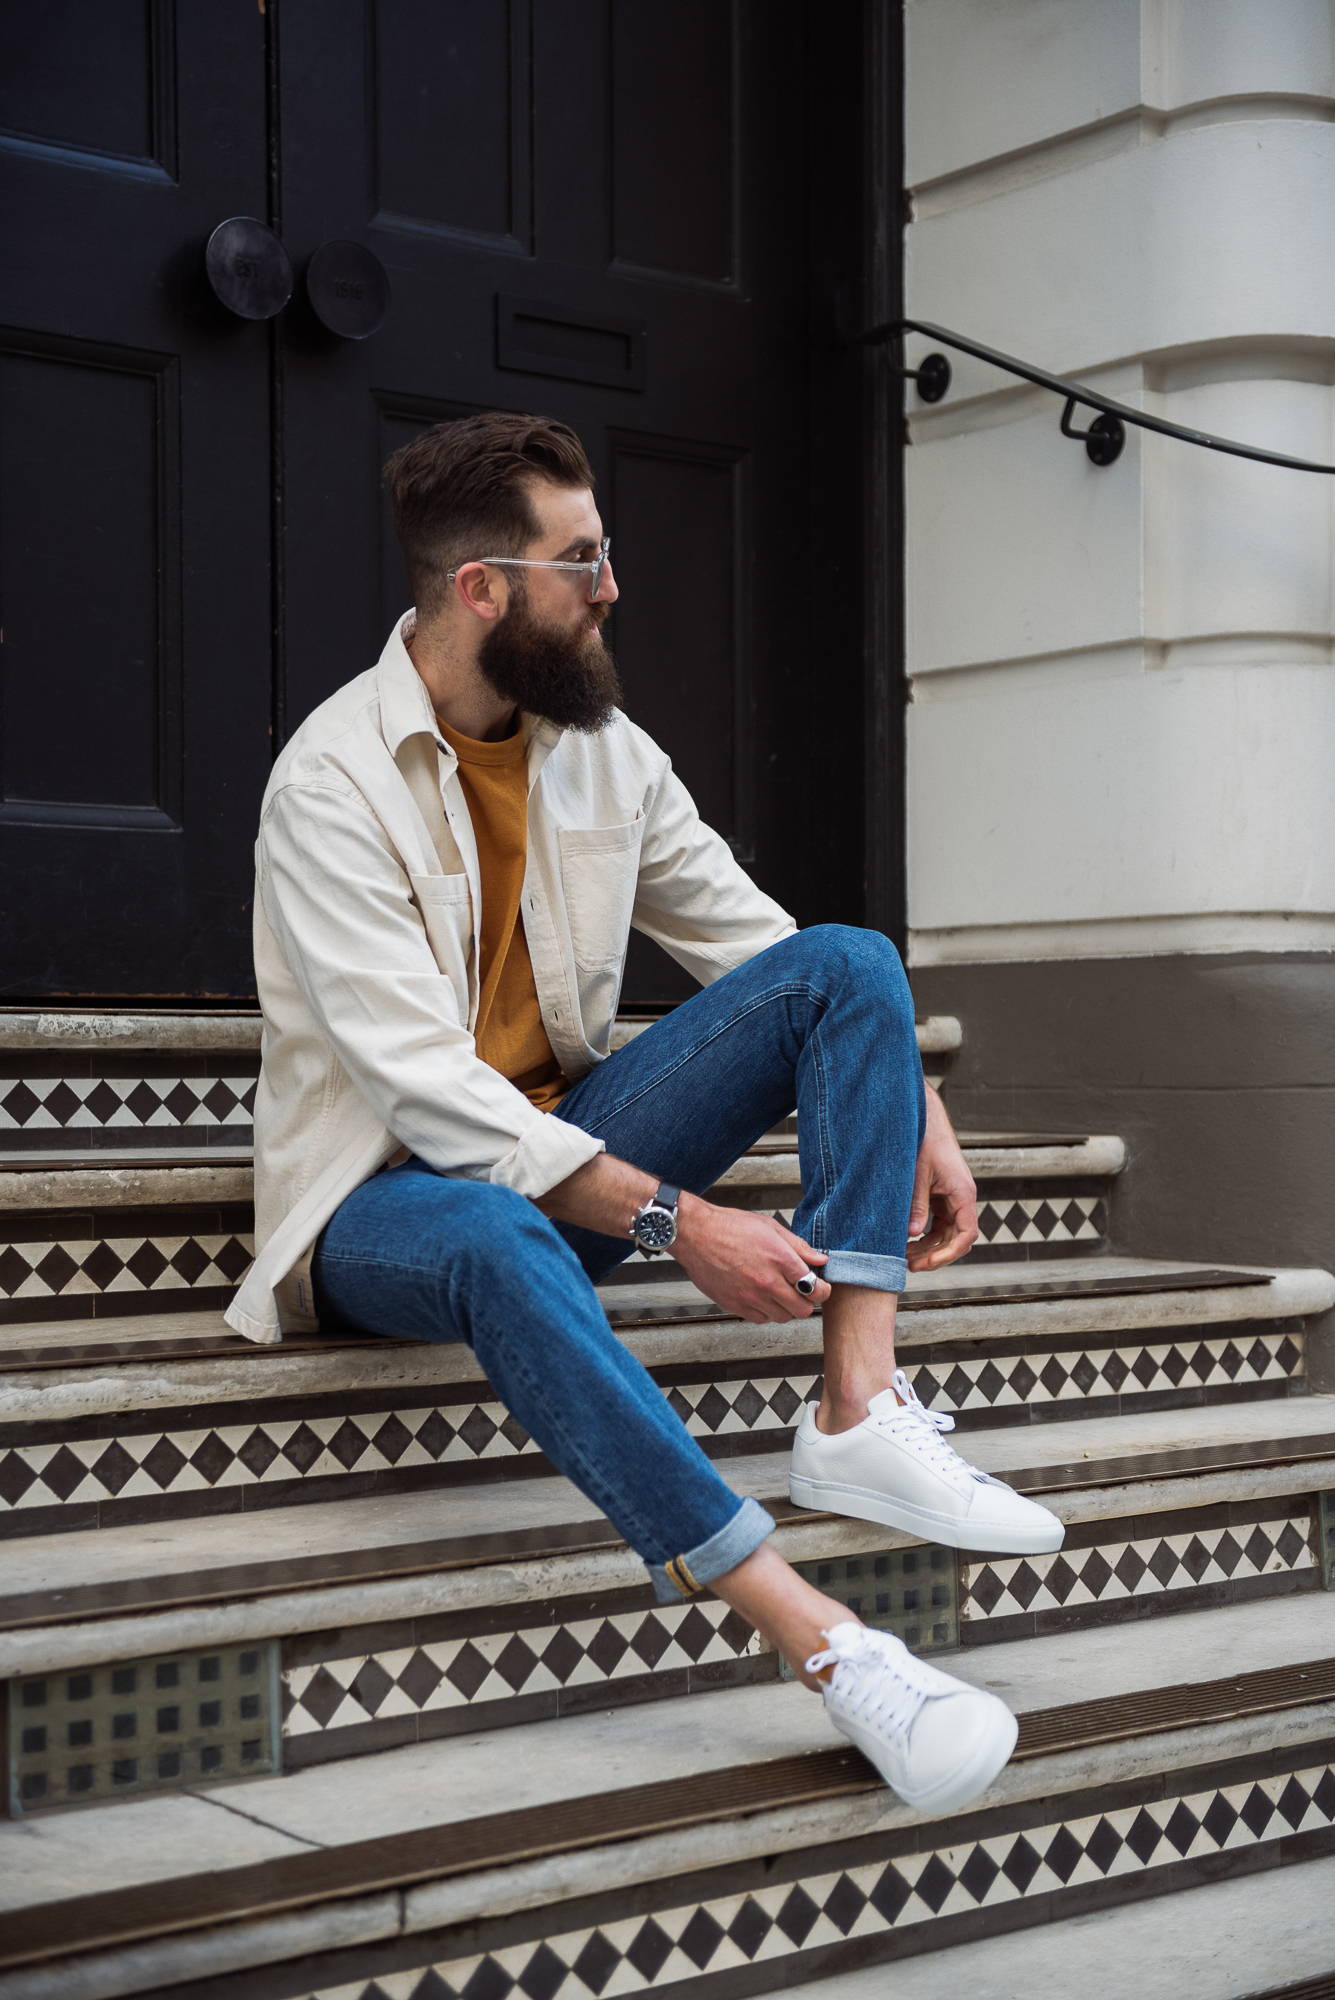 Deco 2.0 White Sneakers Worn with Seth Socks and Denim